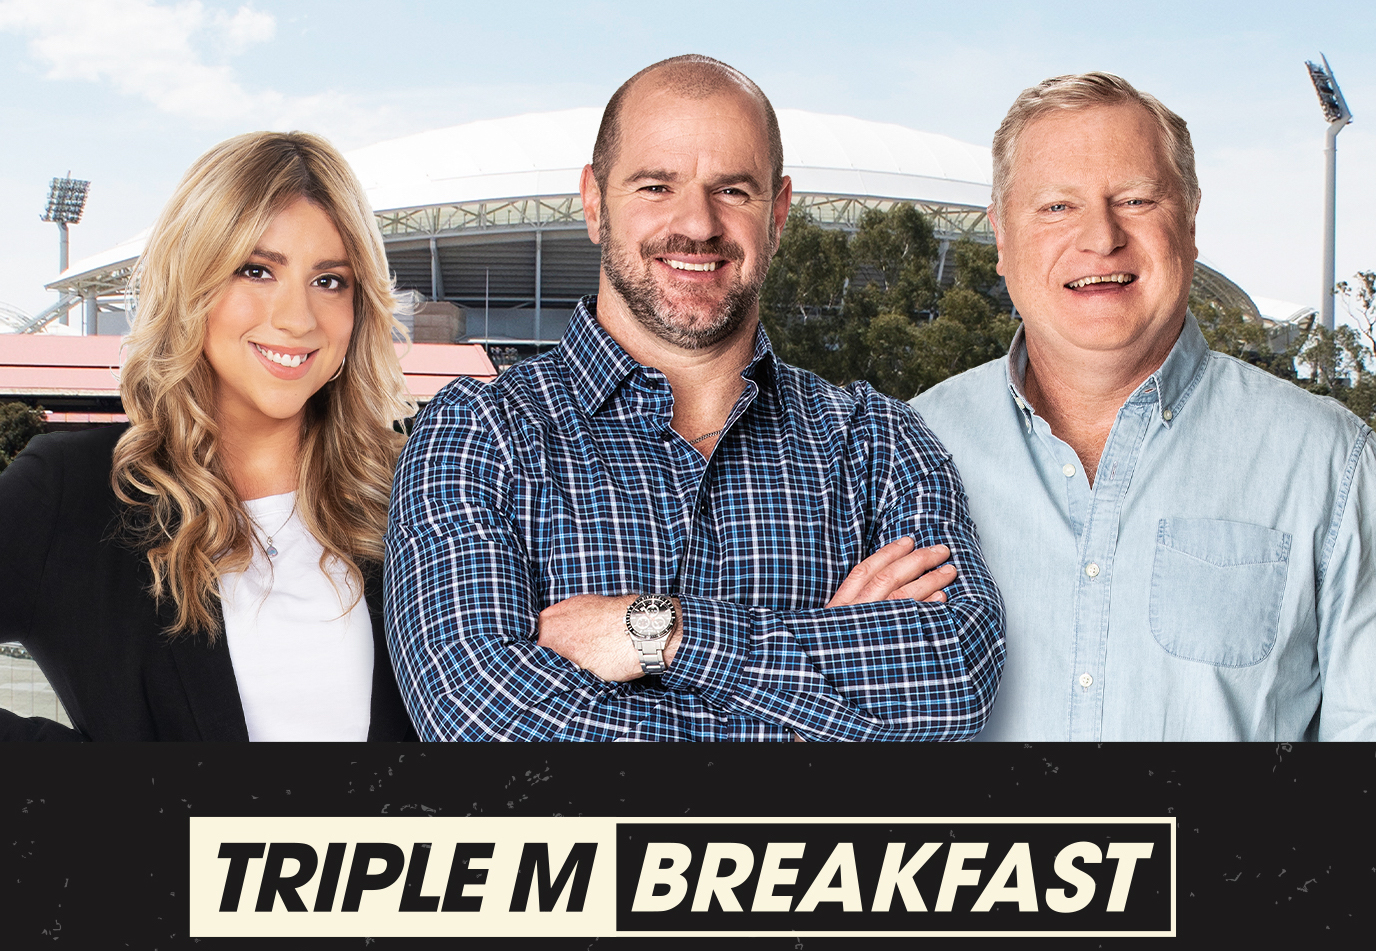 Laura O’Callaghan joins Triple M Breakfast in Adelaide, forming Roo, Ditts & Loz